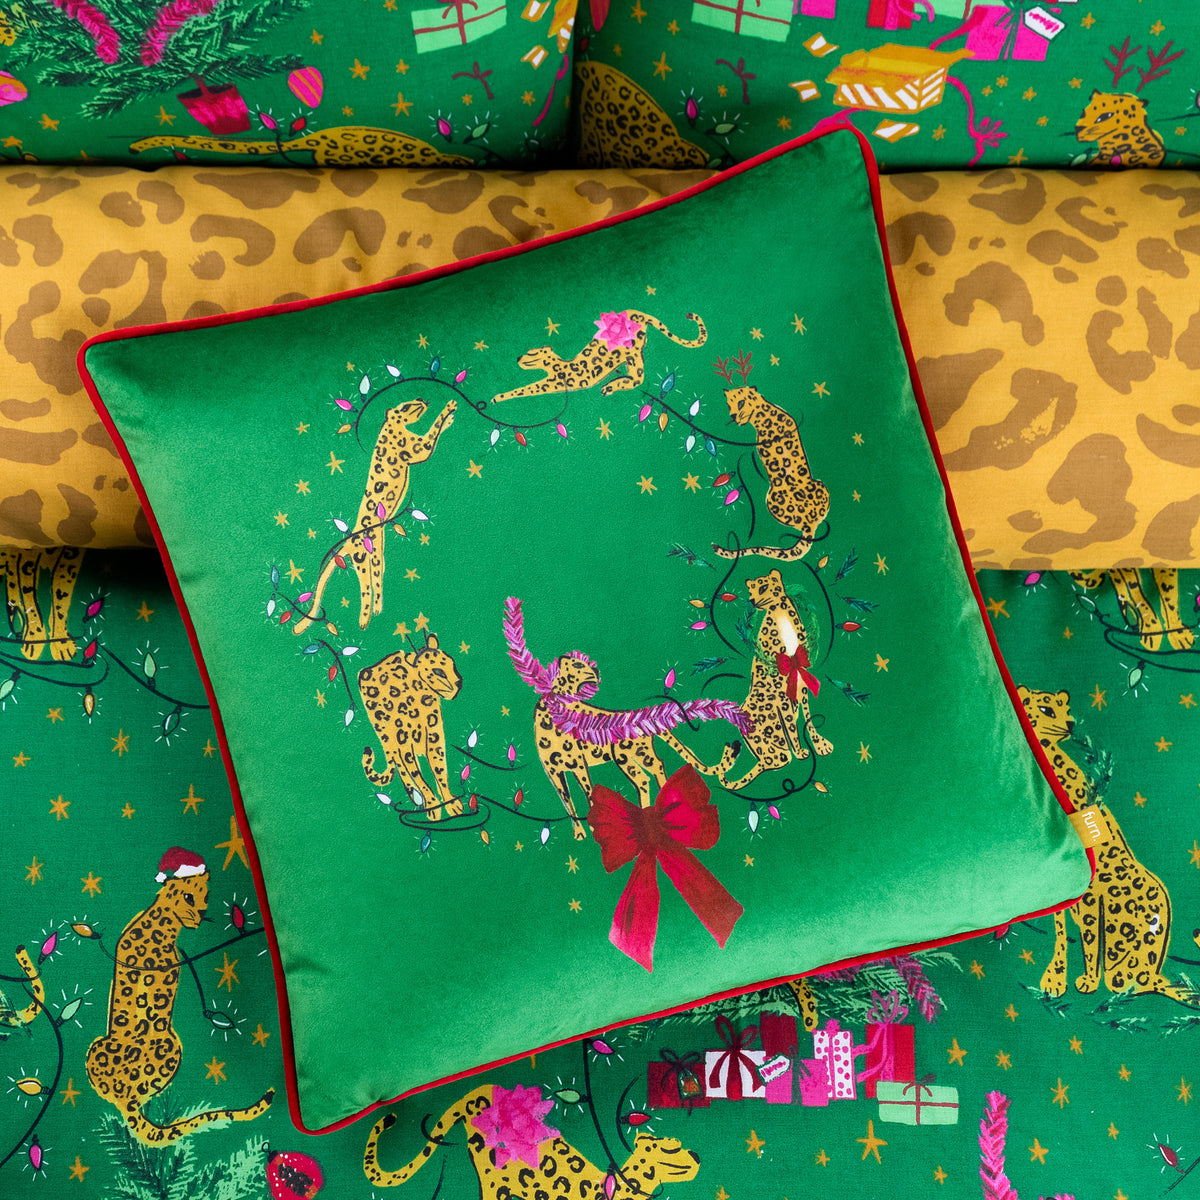 Purrfect Leaping Leopards 43x43 Cushion by Roseland Furniture